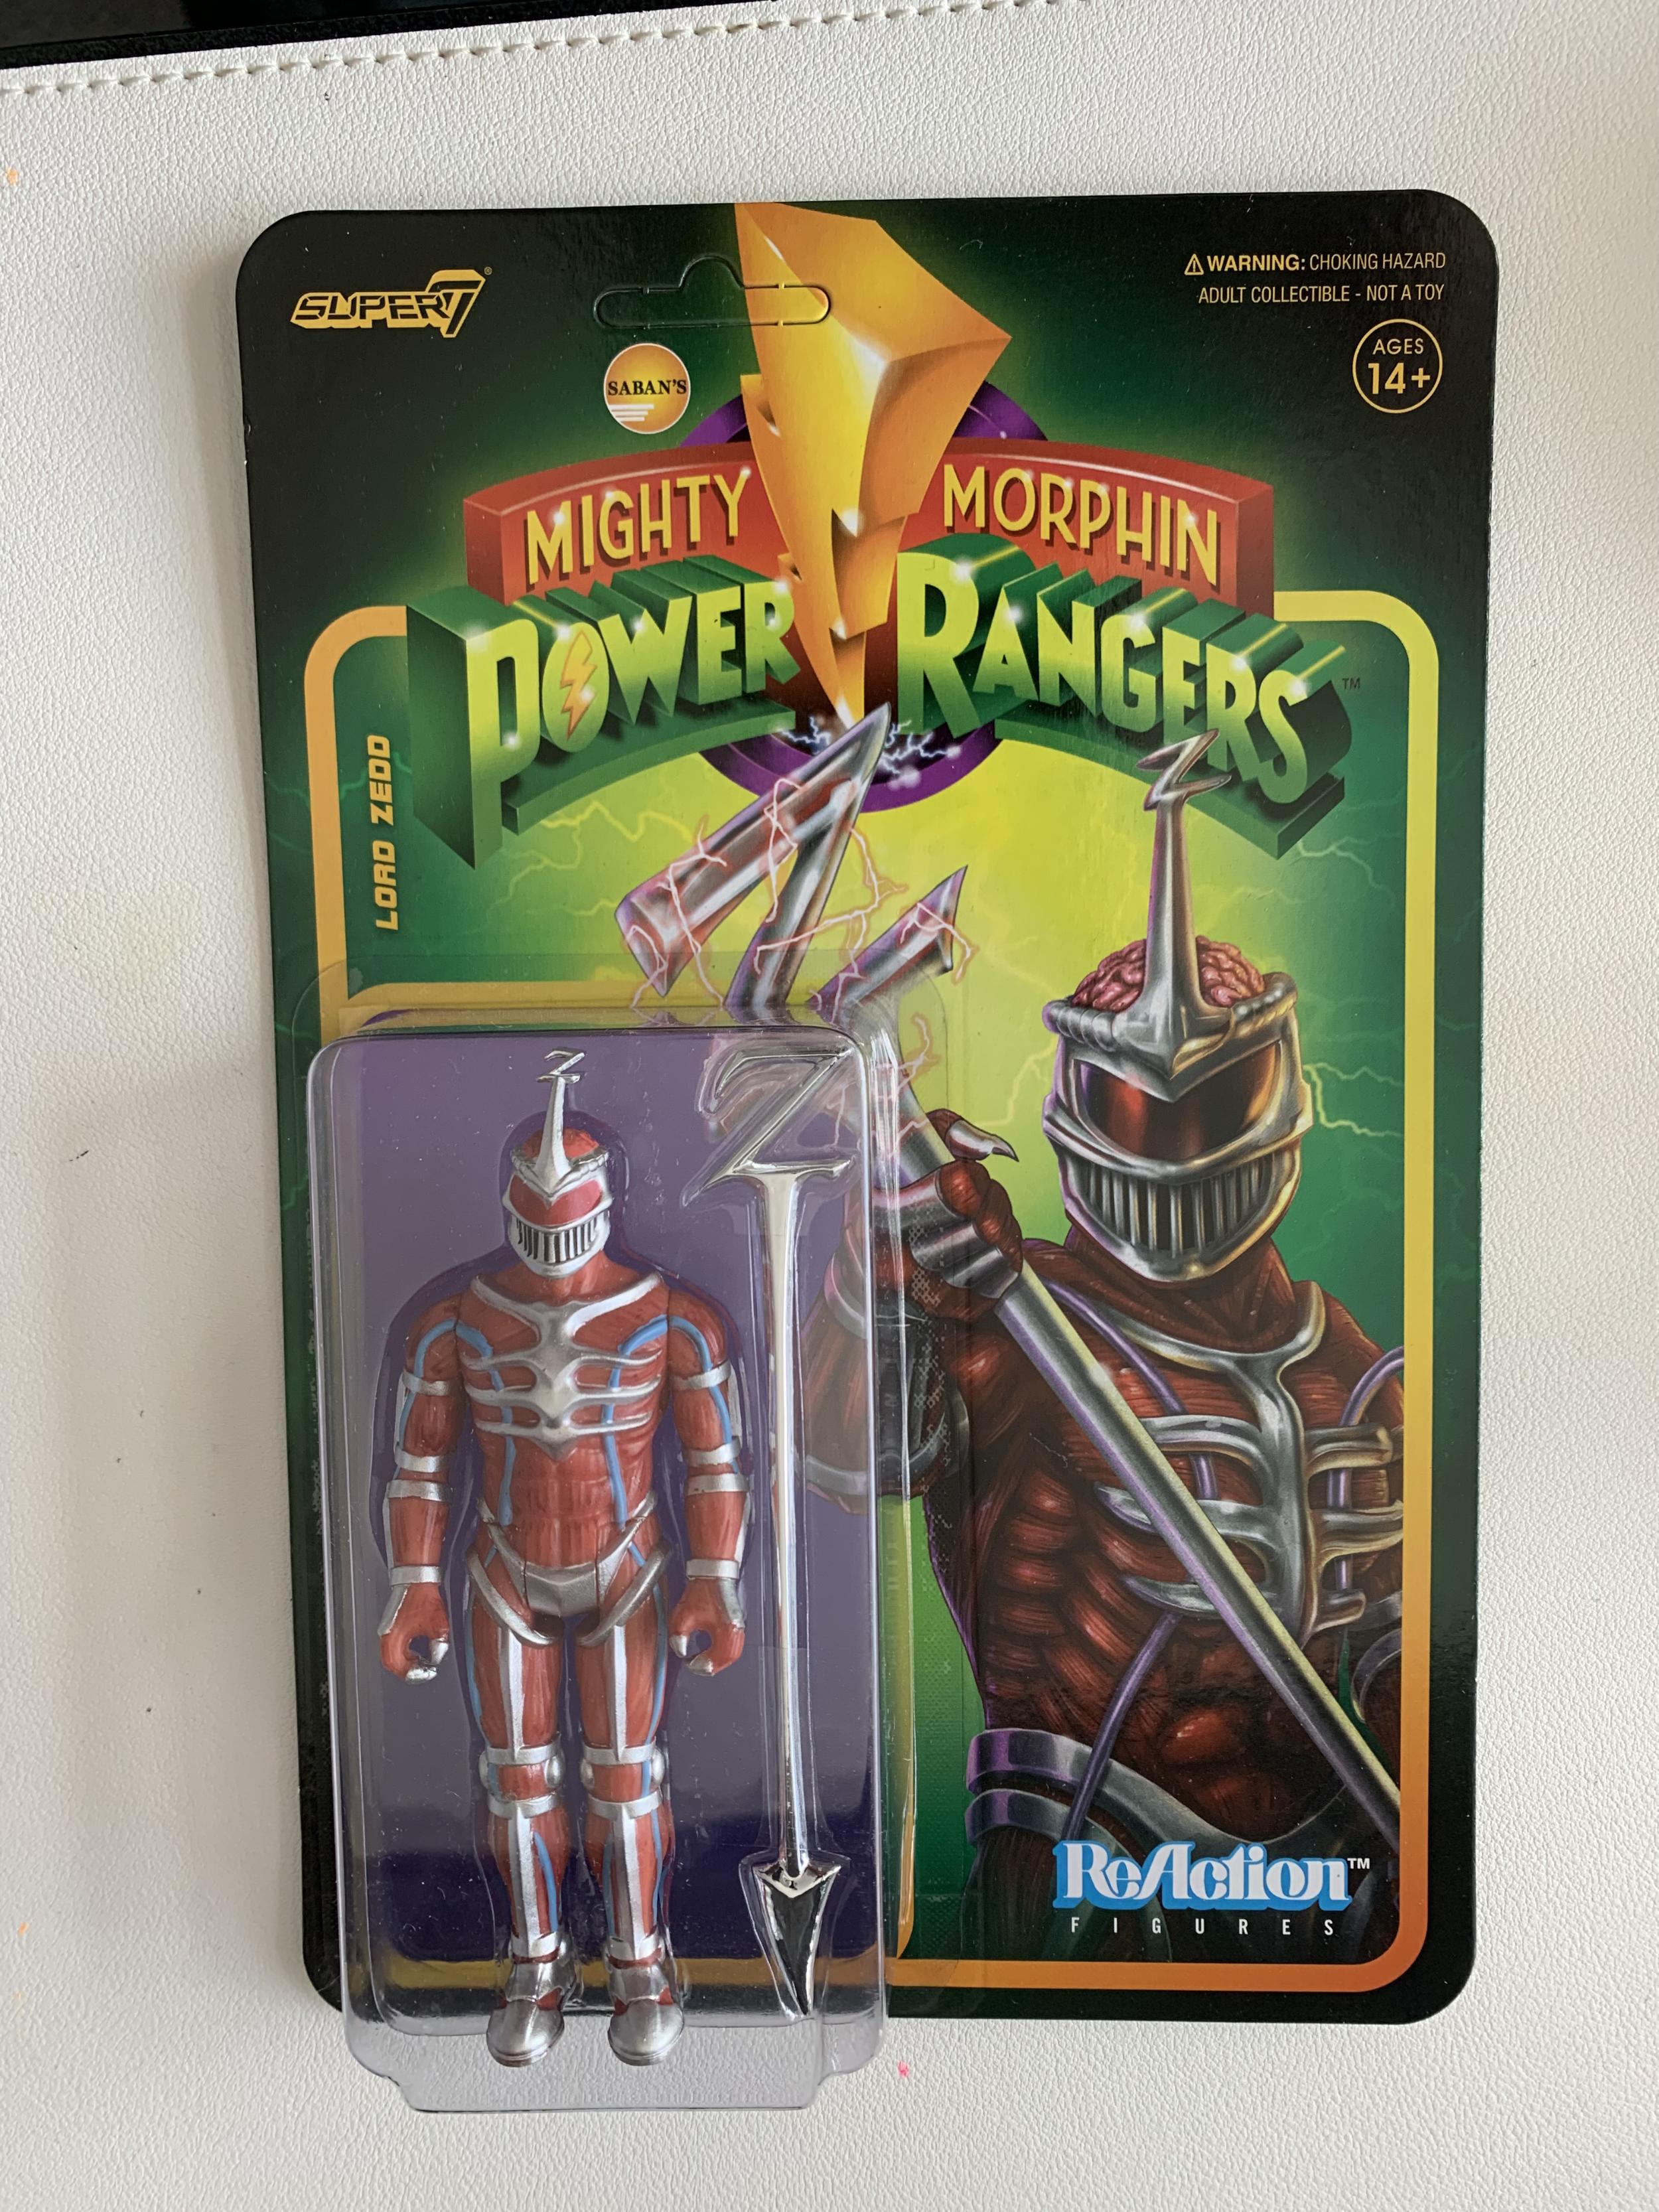 Lord Zedd, ReAction figure from the TV series ‘Power Rangers’  Wave 2